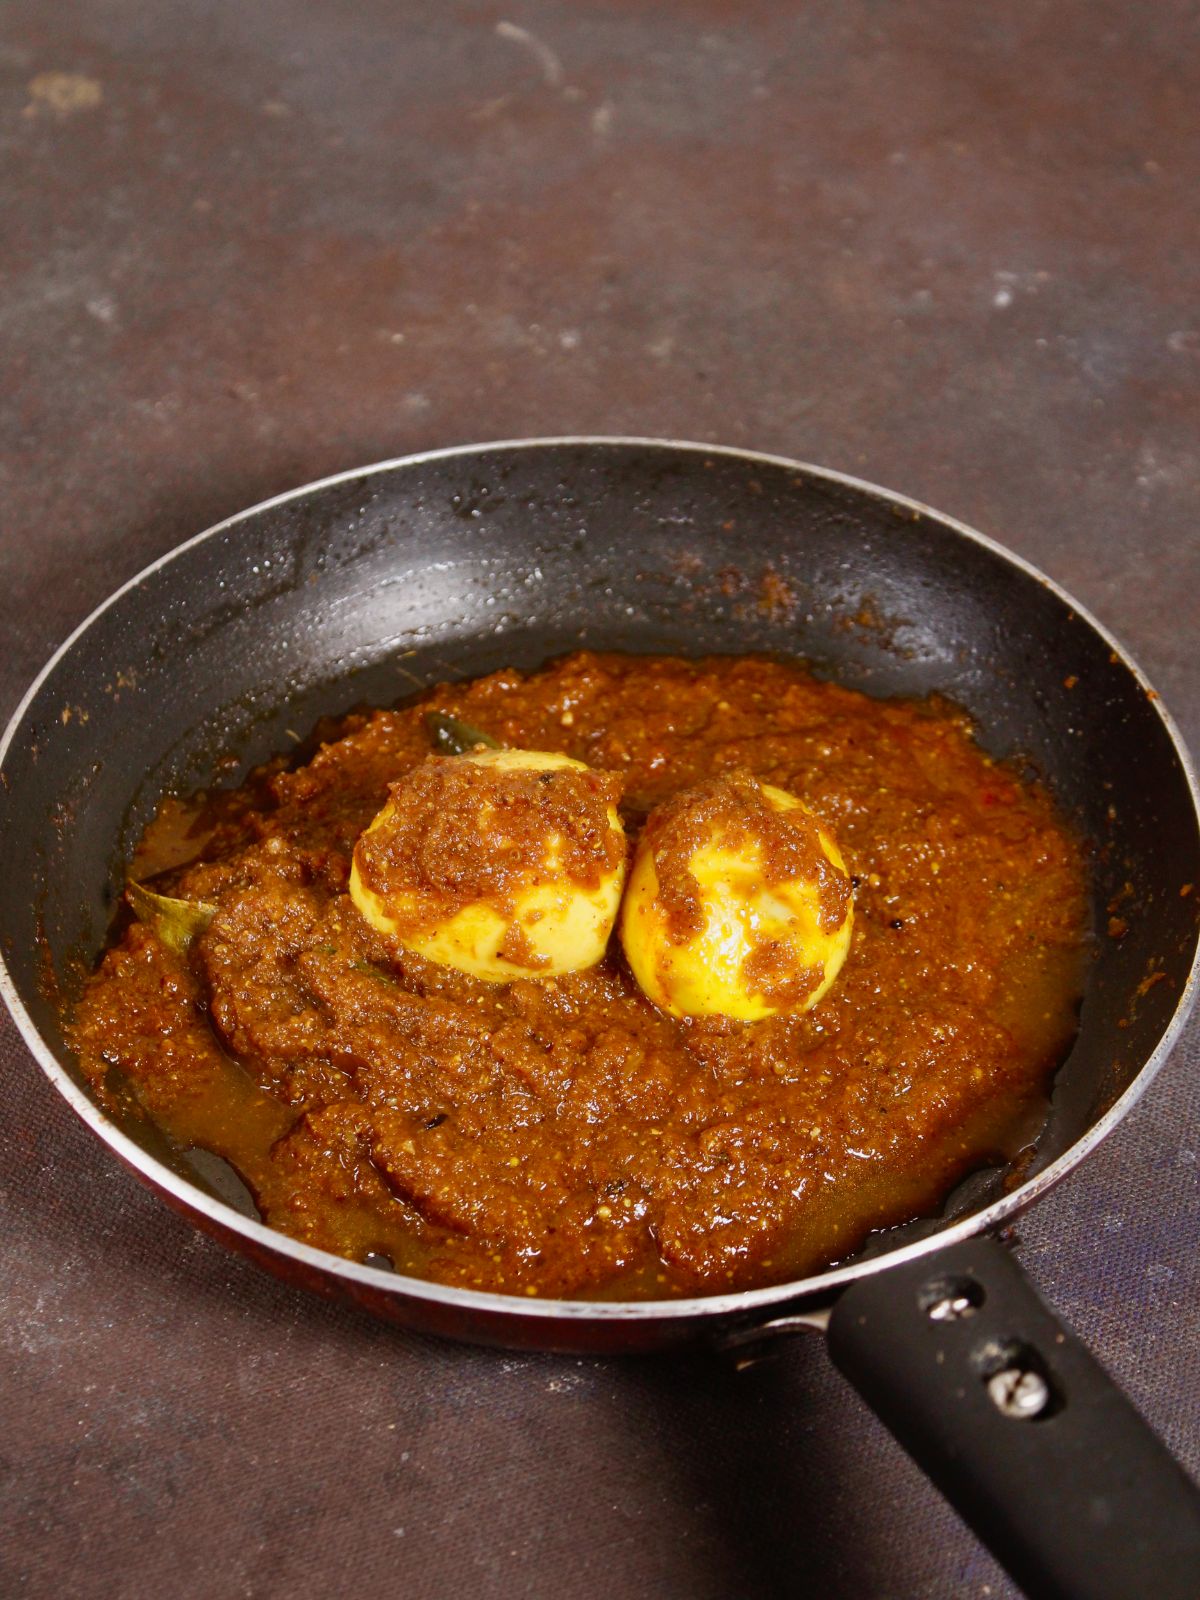 yummy egg curry with kasundi ready to enjoy with rice or rotis 